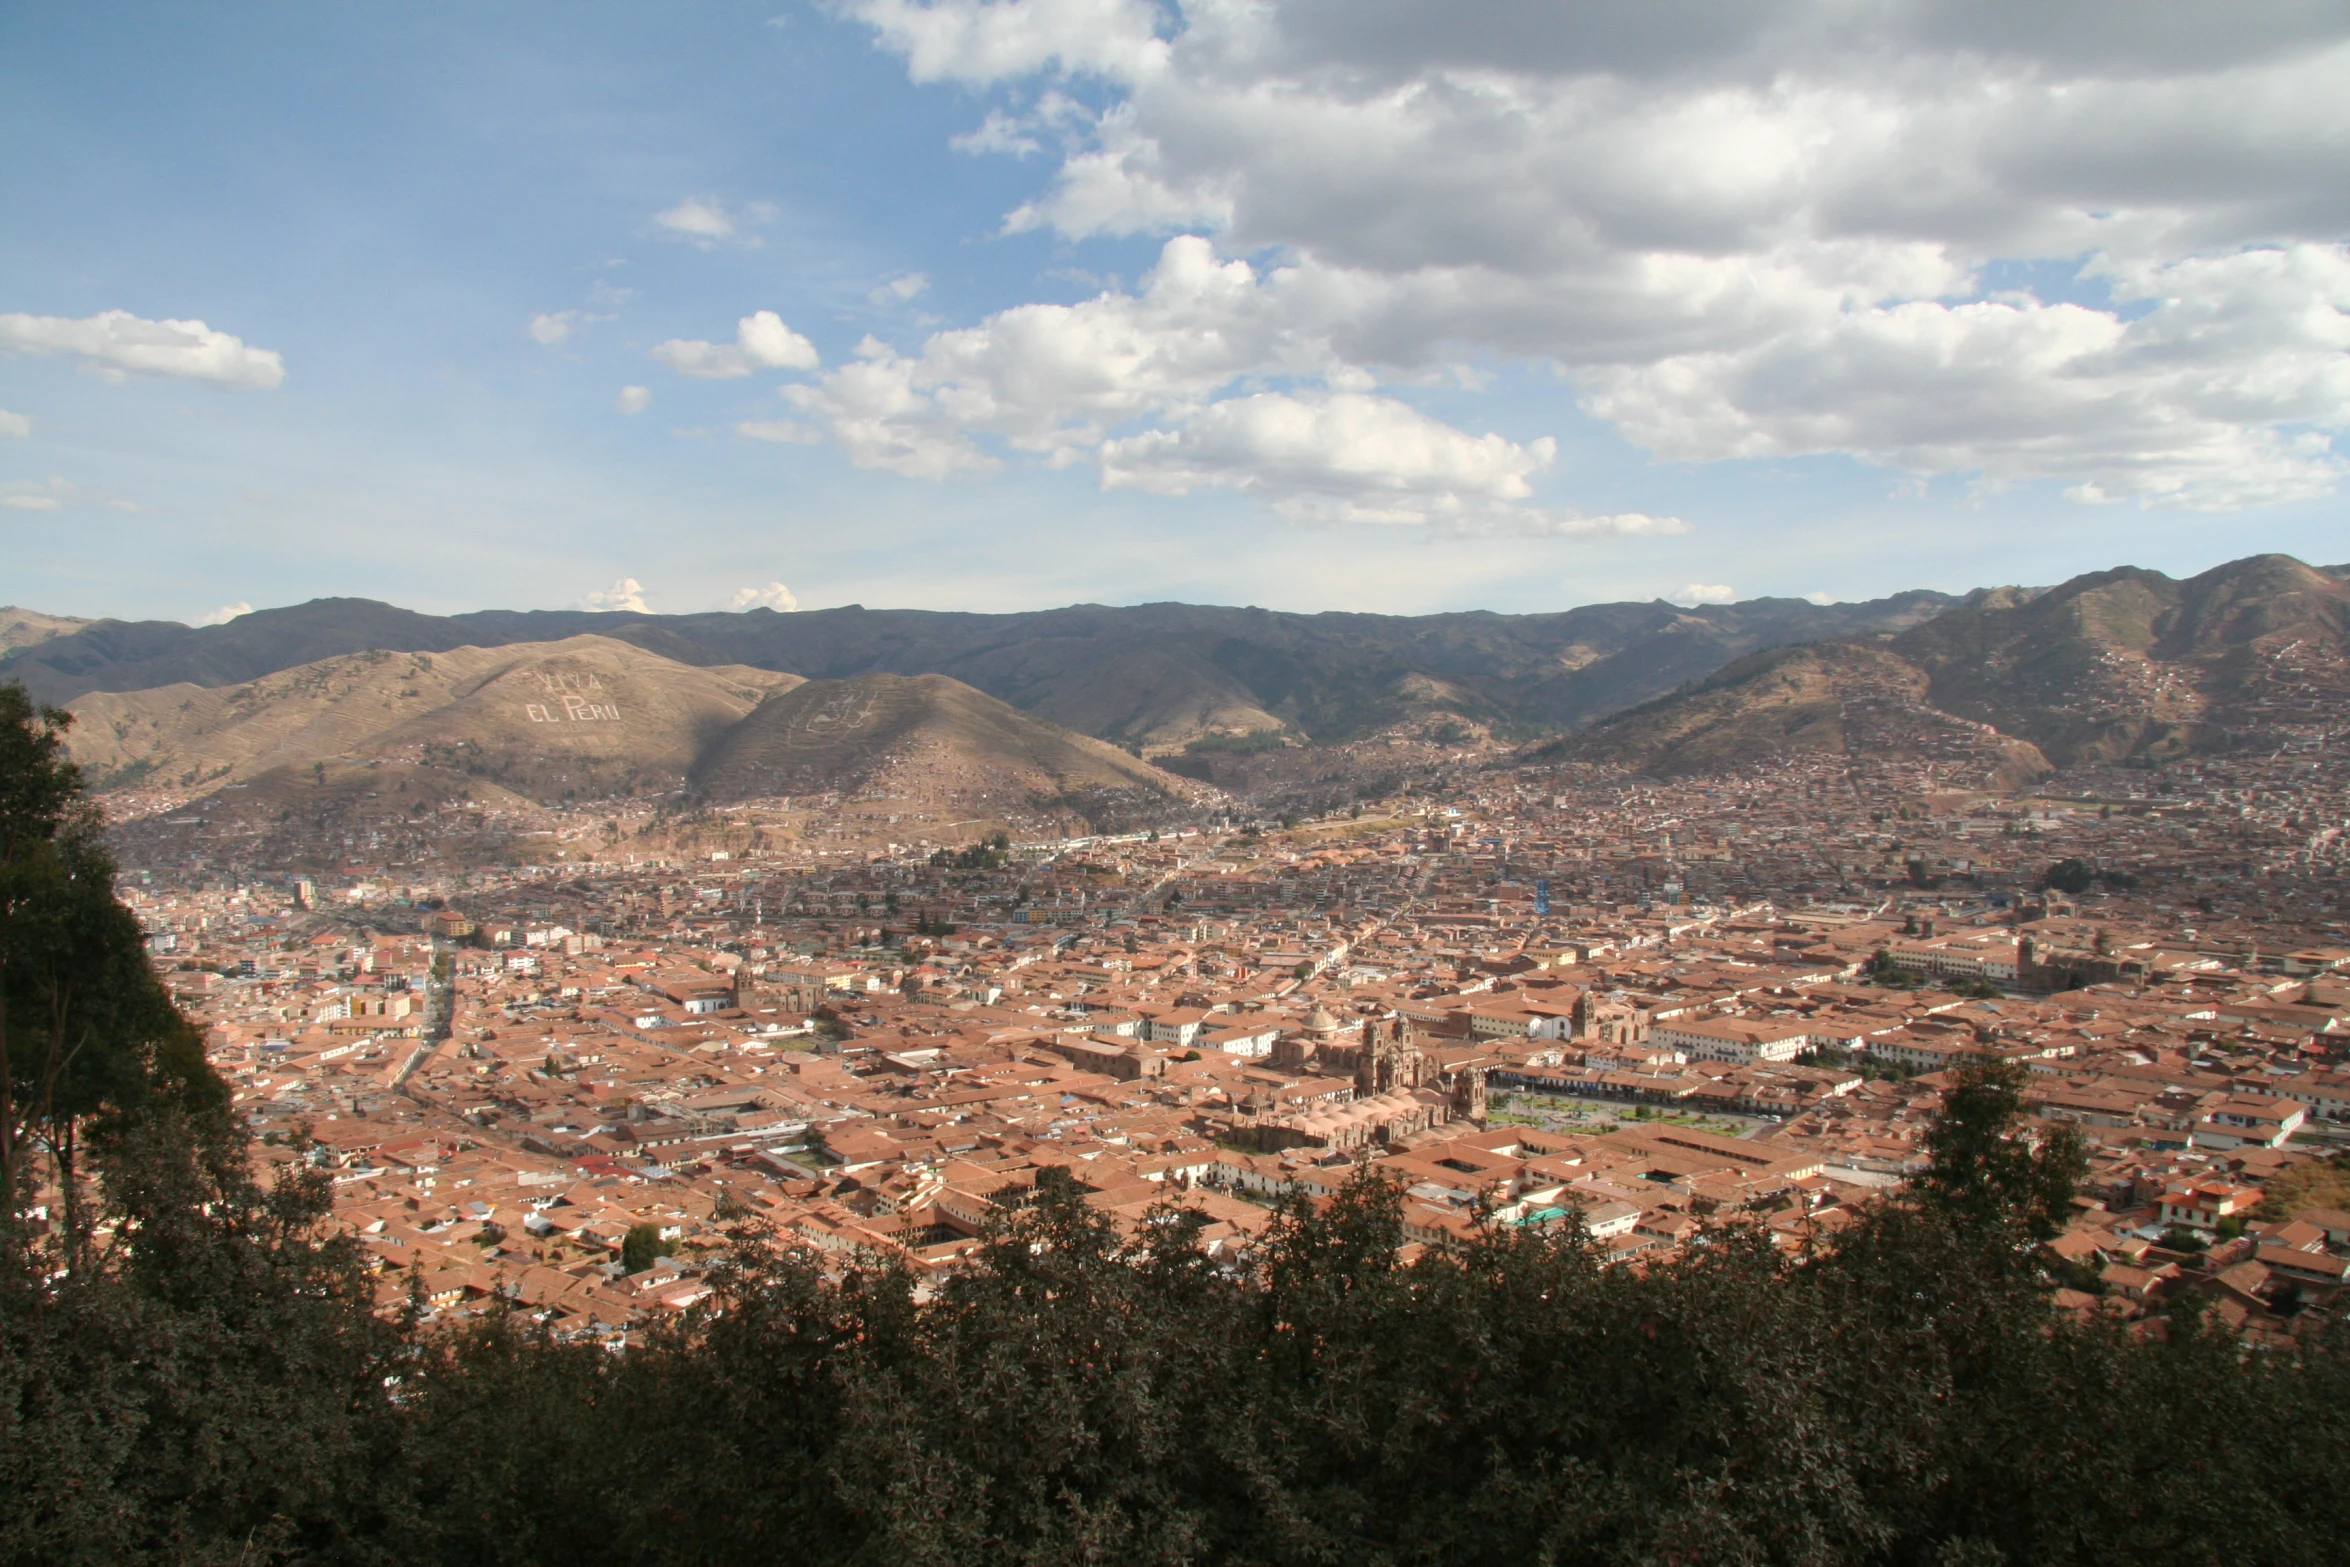 view of a town nestled in the mountains